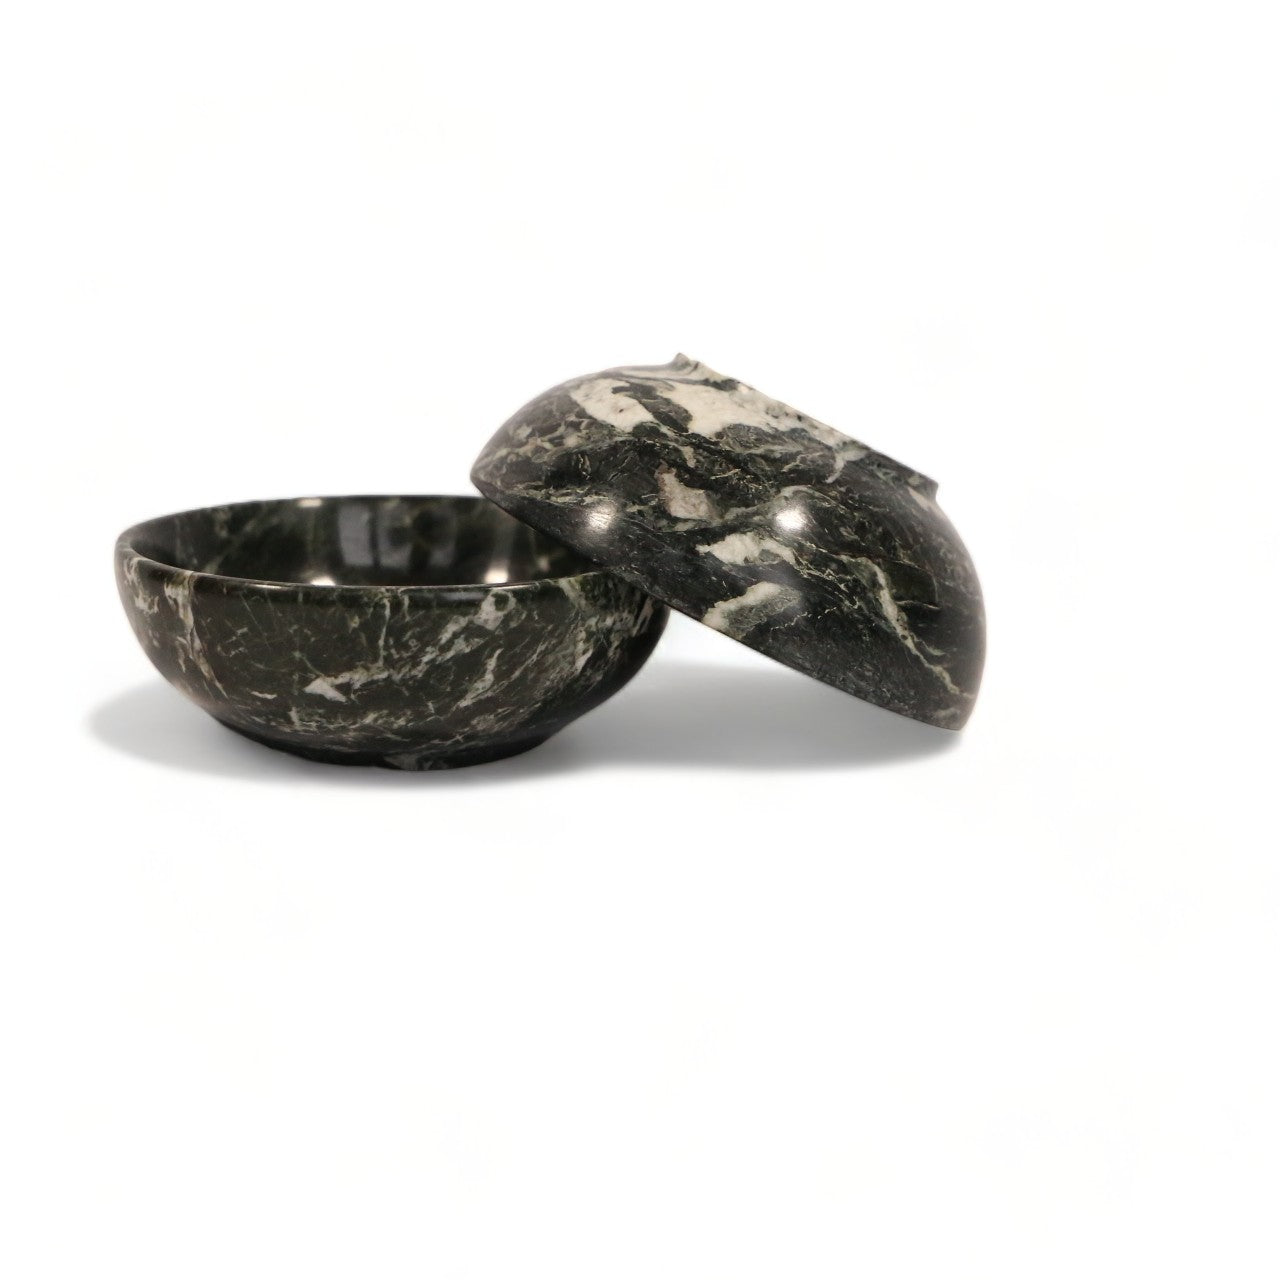 Exclusive Handcrafted Black Zebra Marble Bowl 5in or 12cm - Himalayan Elegance